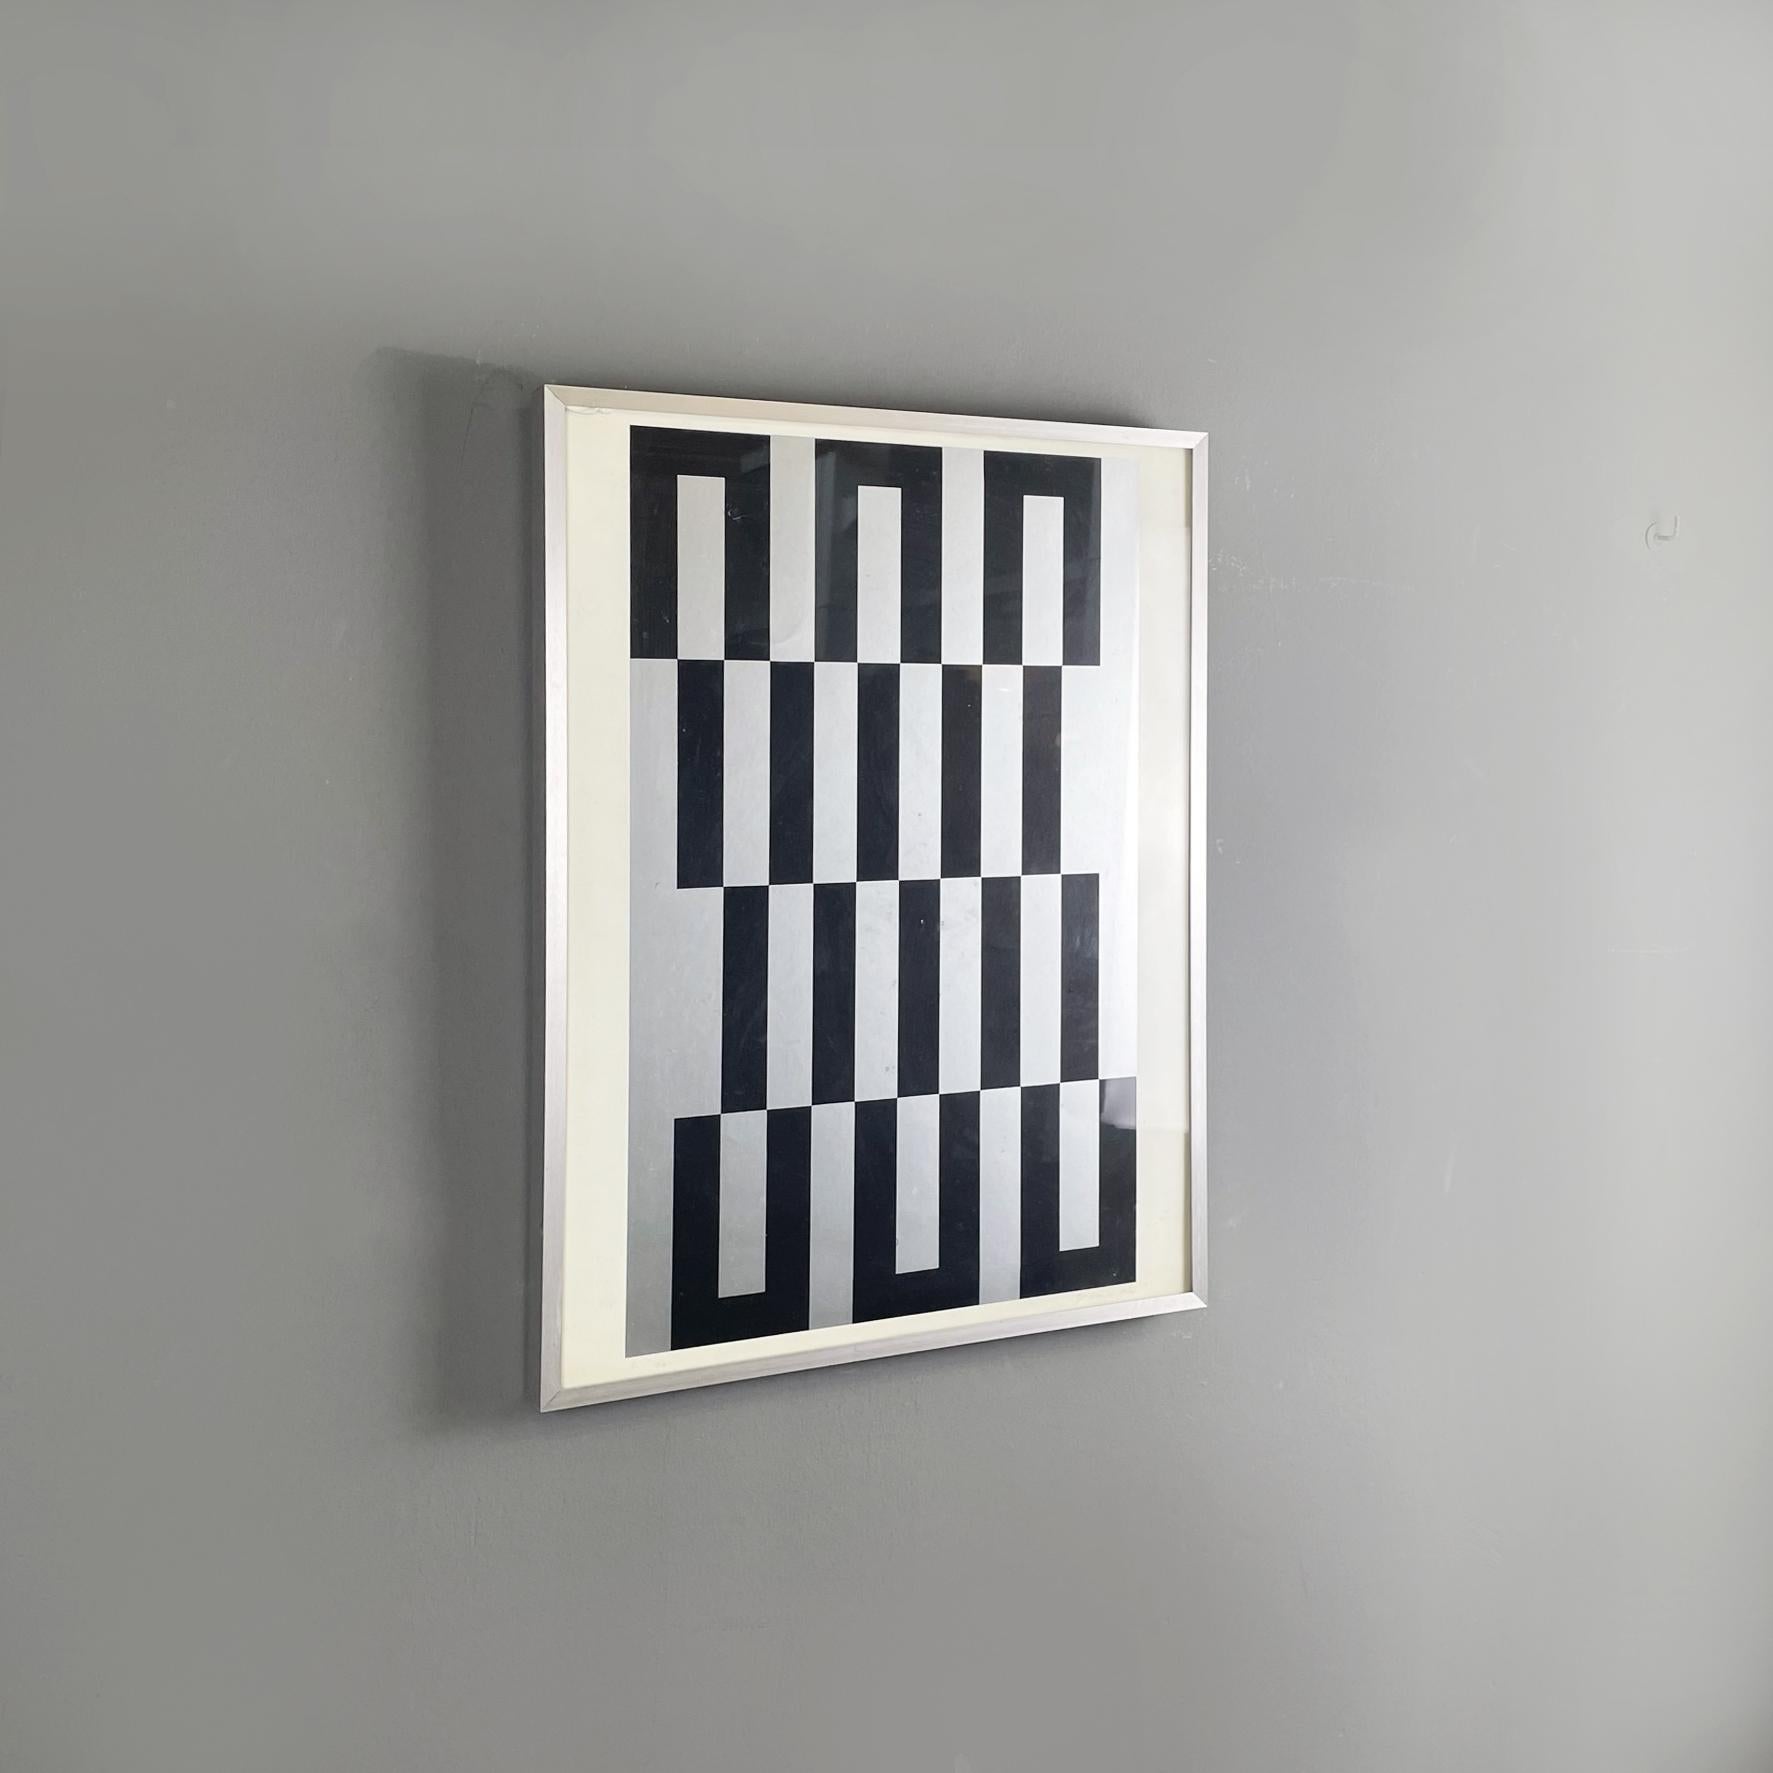 French modern Gray black white Screen-print by Julije Knifer, 1970s
Screen-print in light gray and black on paper. The subject of the screen printing is a geometric motif. With silver metal frame.
Designed and manufactured by Julije Knifer in 1970s.